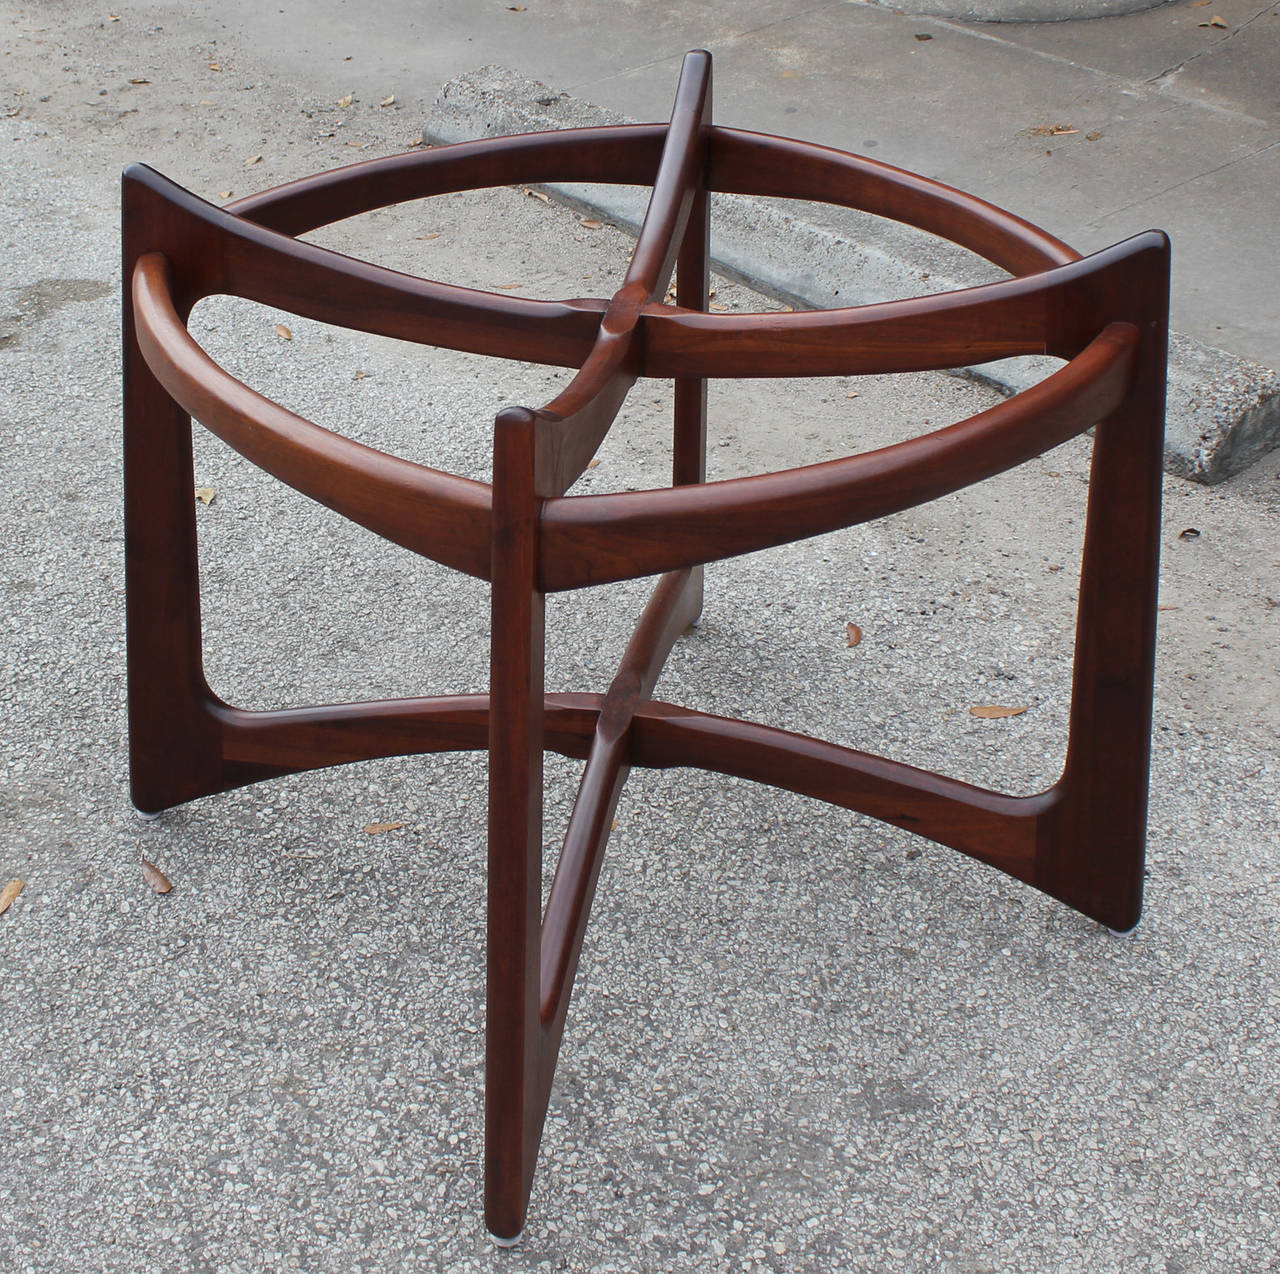 Dining table by Adrian Pearsall for Craft Associates. Stunning sculptural walnut. Perfect with a round glass top.